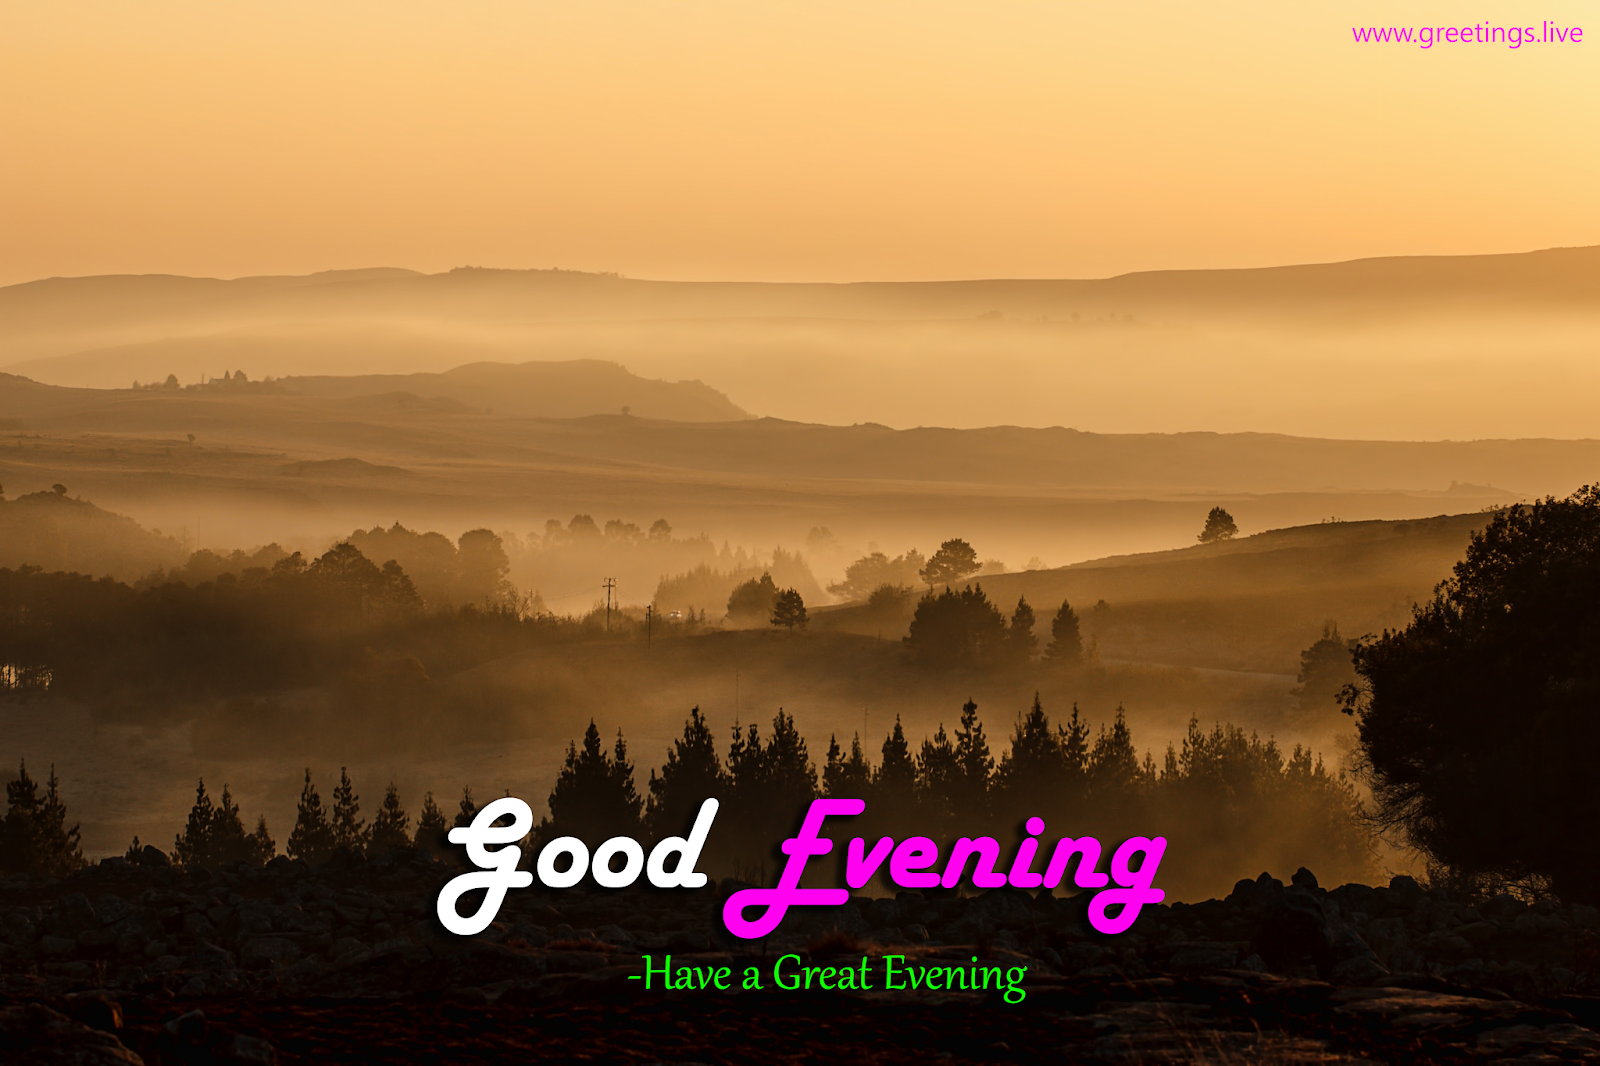 Greetings Live Free Daily Greetings Pictures Festival Gif Images Have A Great Evening Landscape Wishes Image